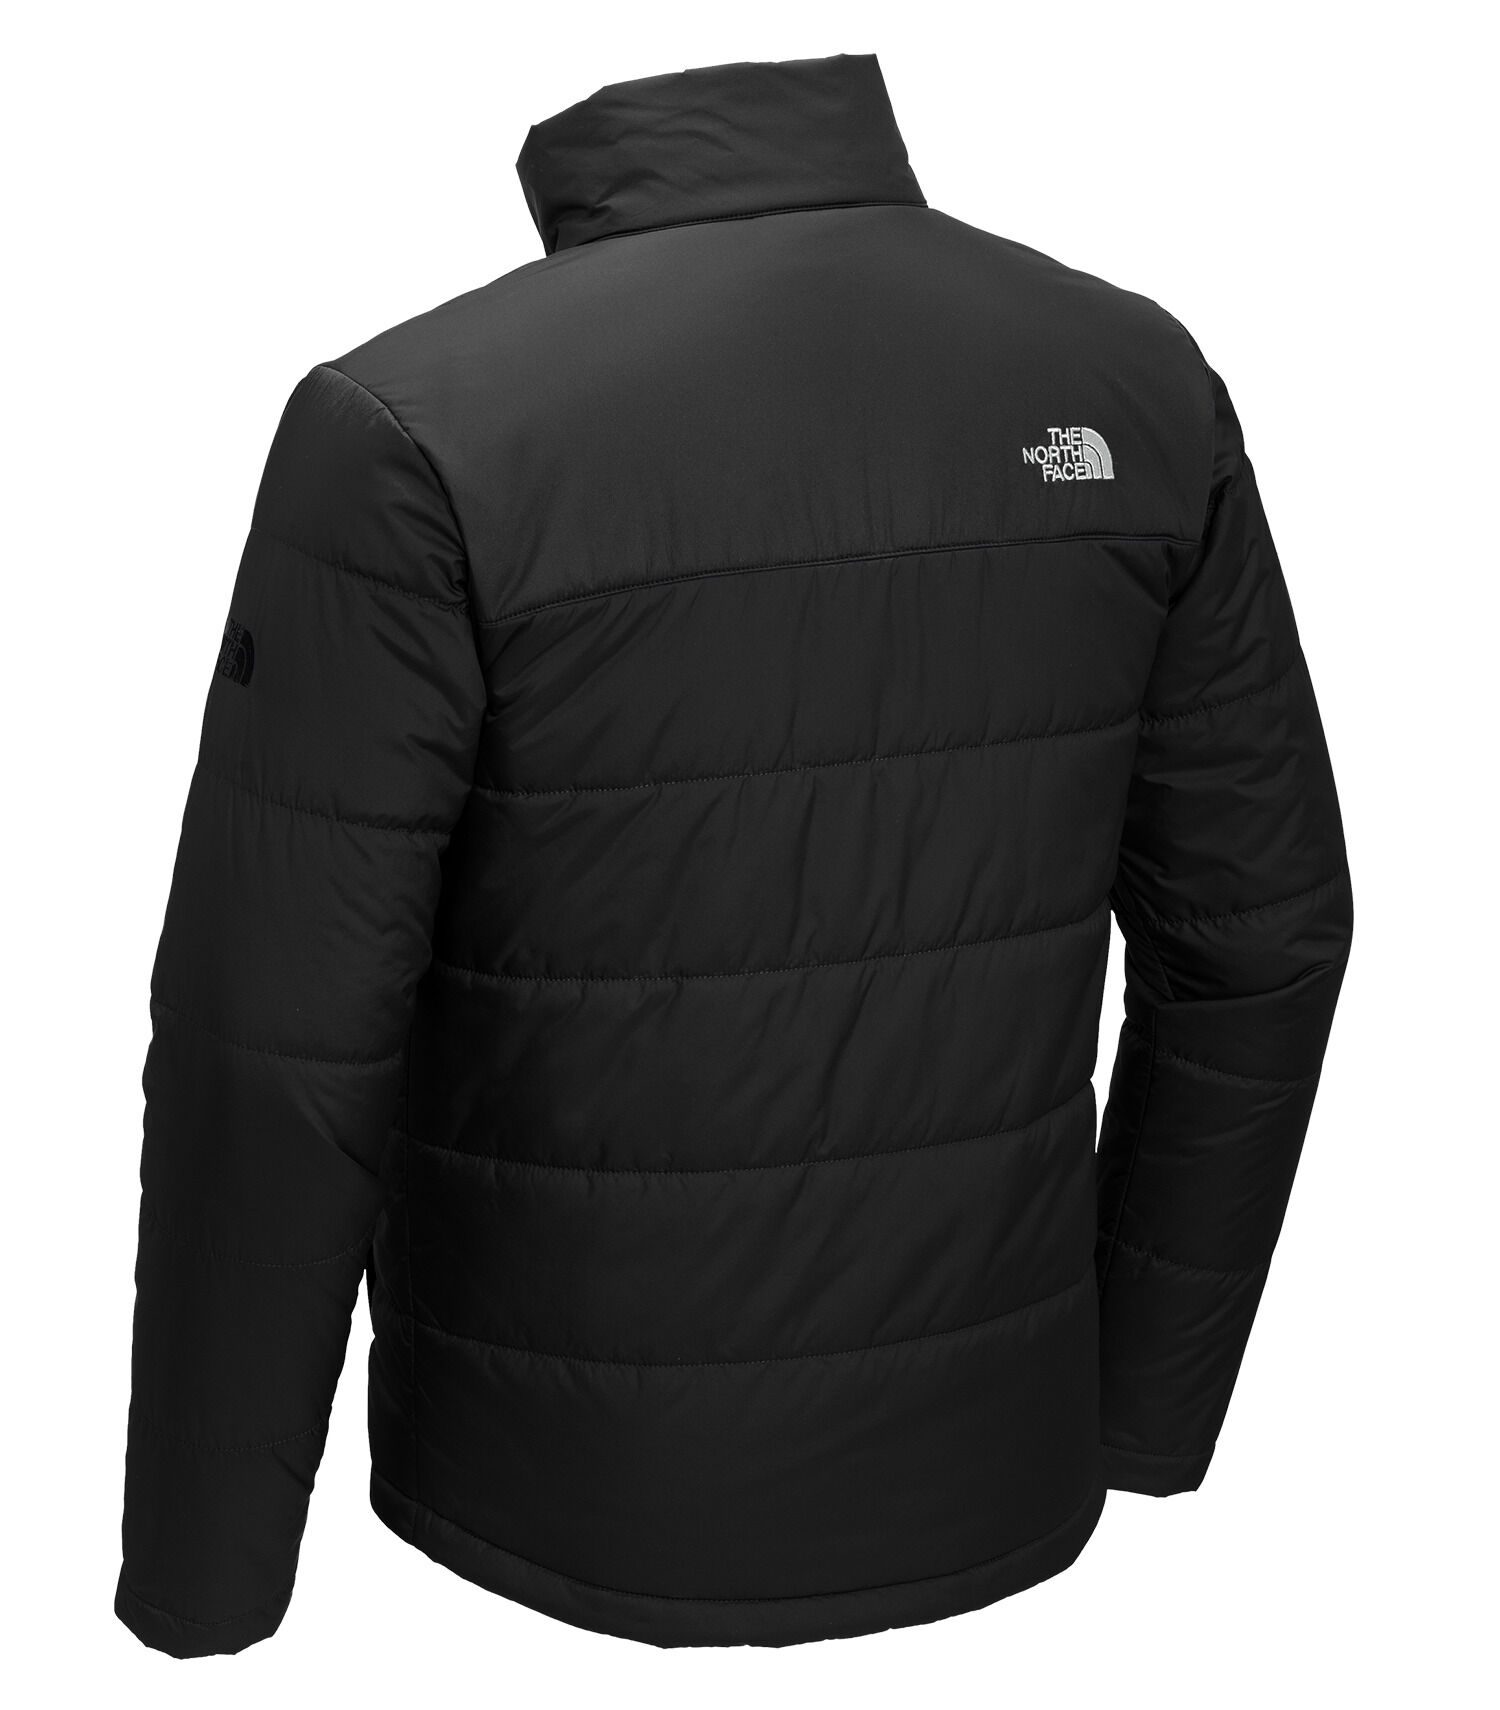 THE NORTH FACE EVERYDAY INSULATED JACKET #NF0A529K Black Back